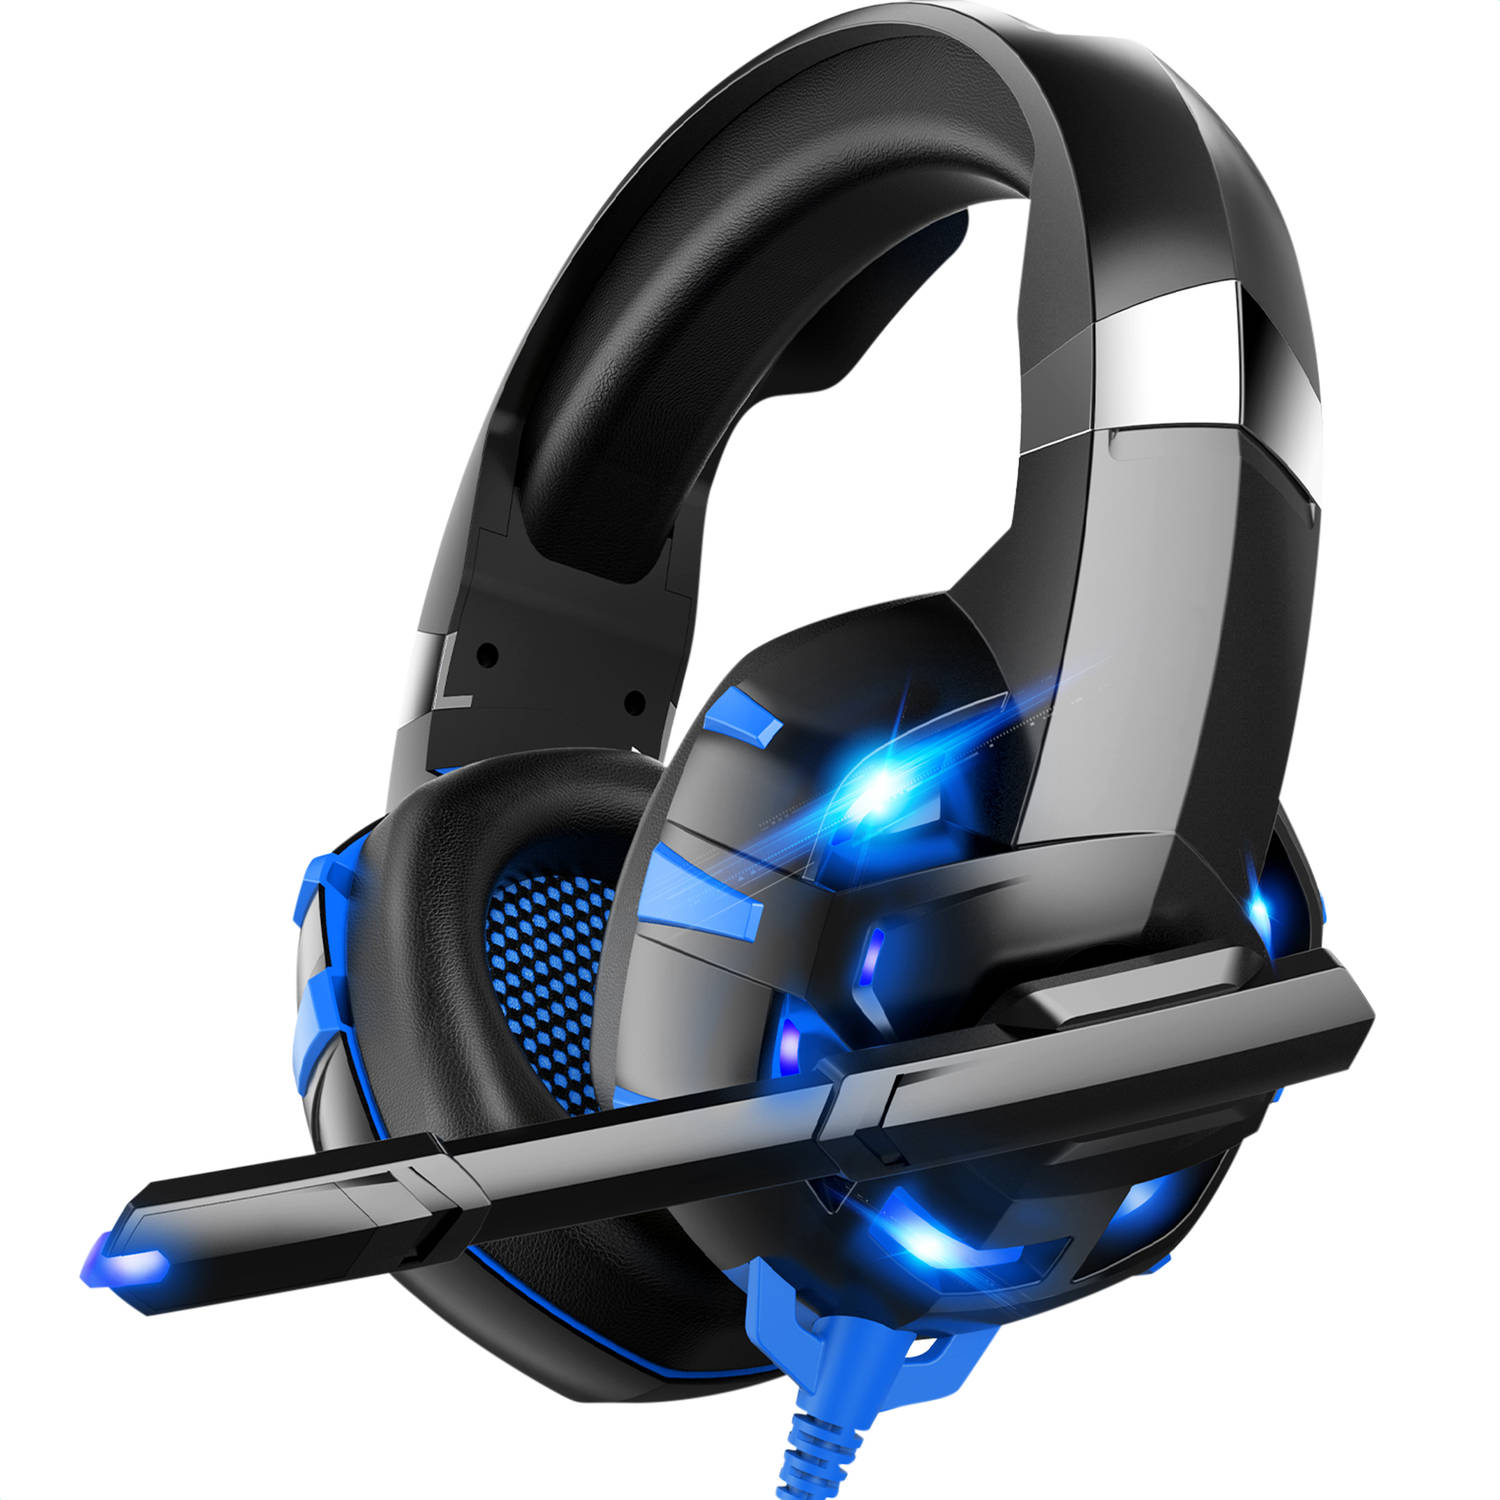 Strex Gaming Headset Met Microfoon Blauw Pc + Ps4 + Ps5 + Xbox One + Xbox Series